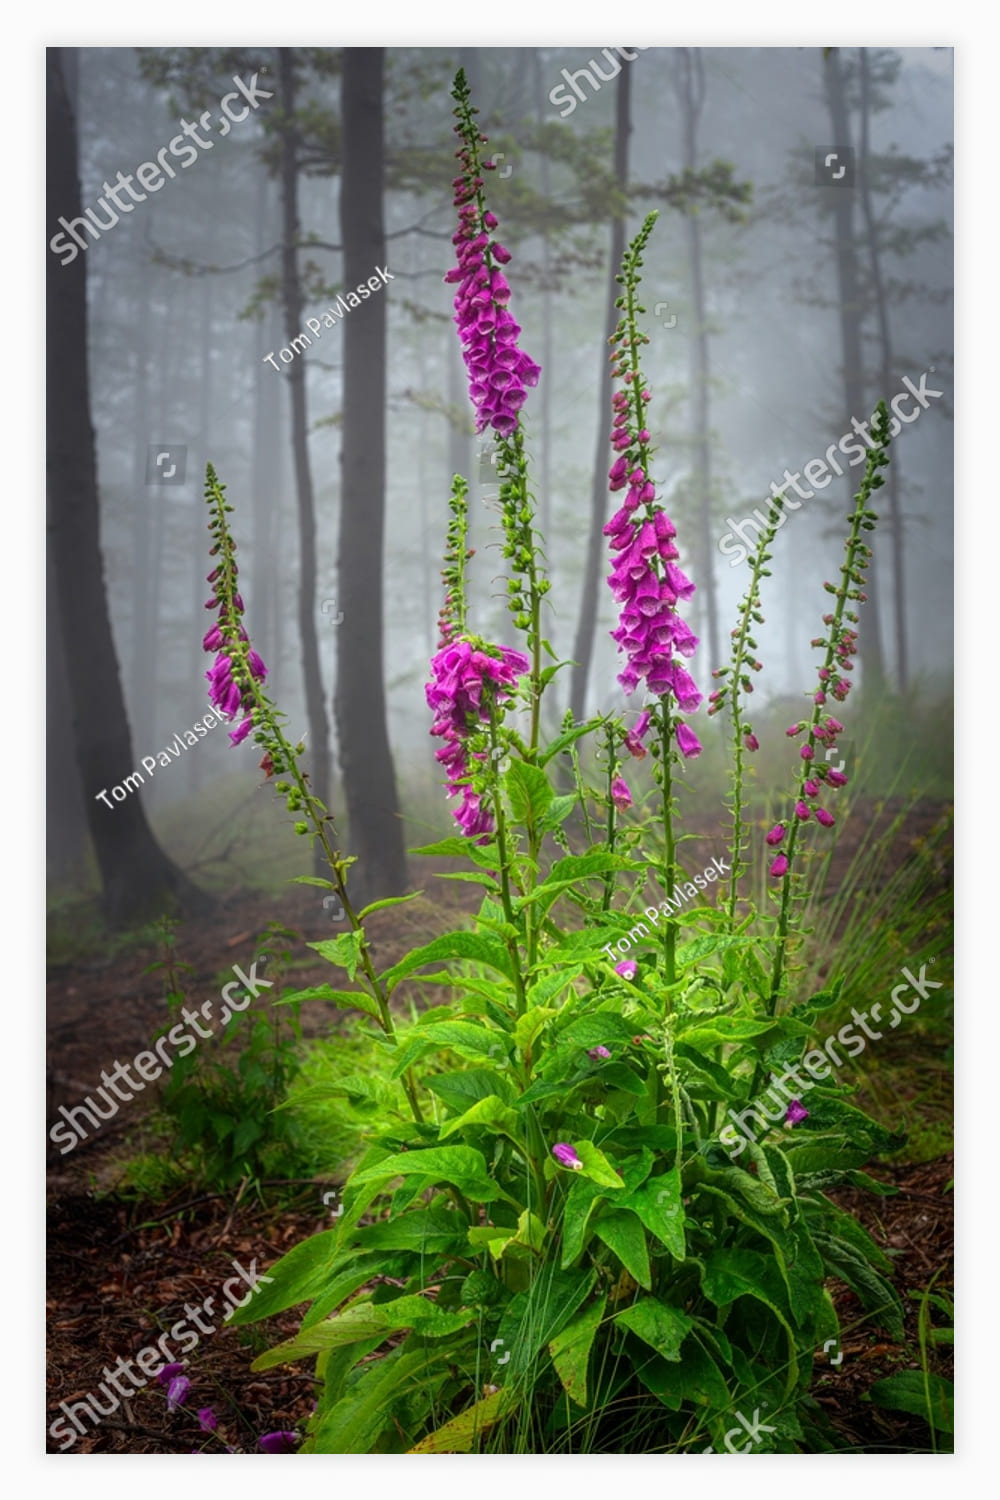 Blooming and growing flower Digitalis purpurea in a misty forest.